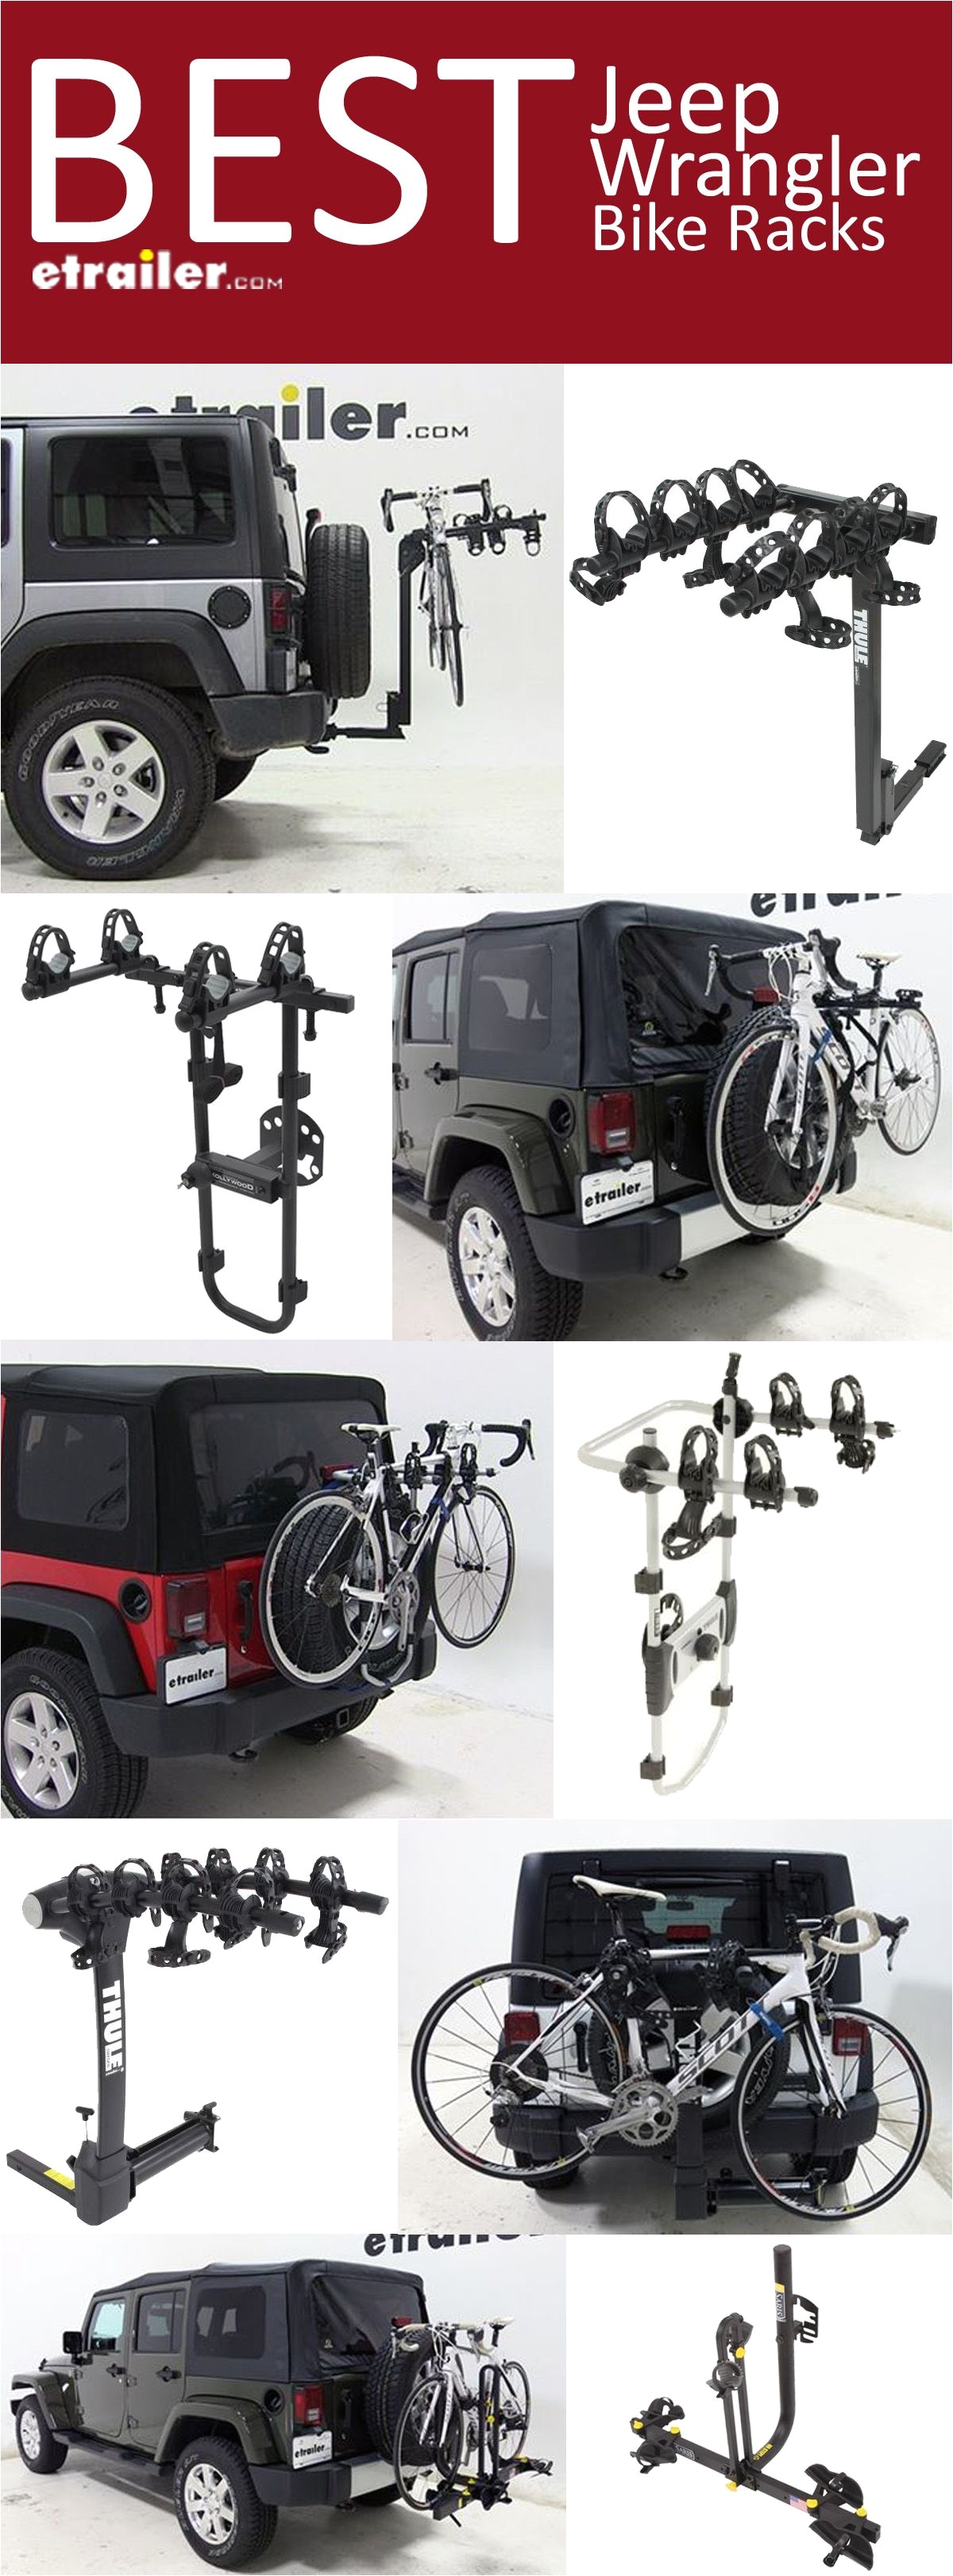 inno racks tire hold hitch mount bicycle rack review biking pinterest hitch mount bike rack and tired